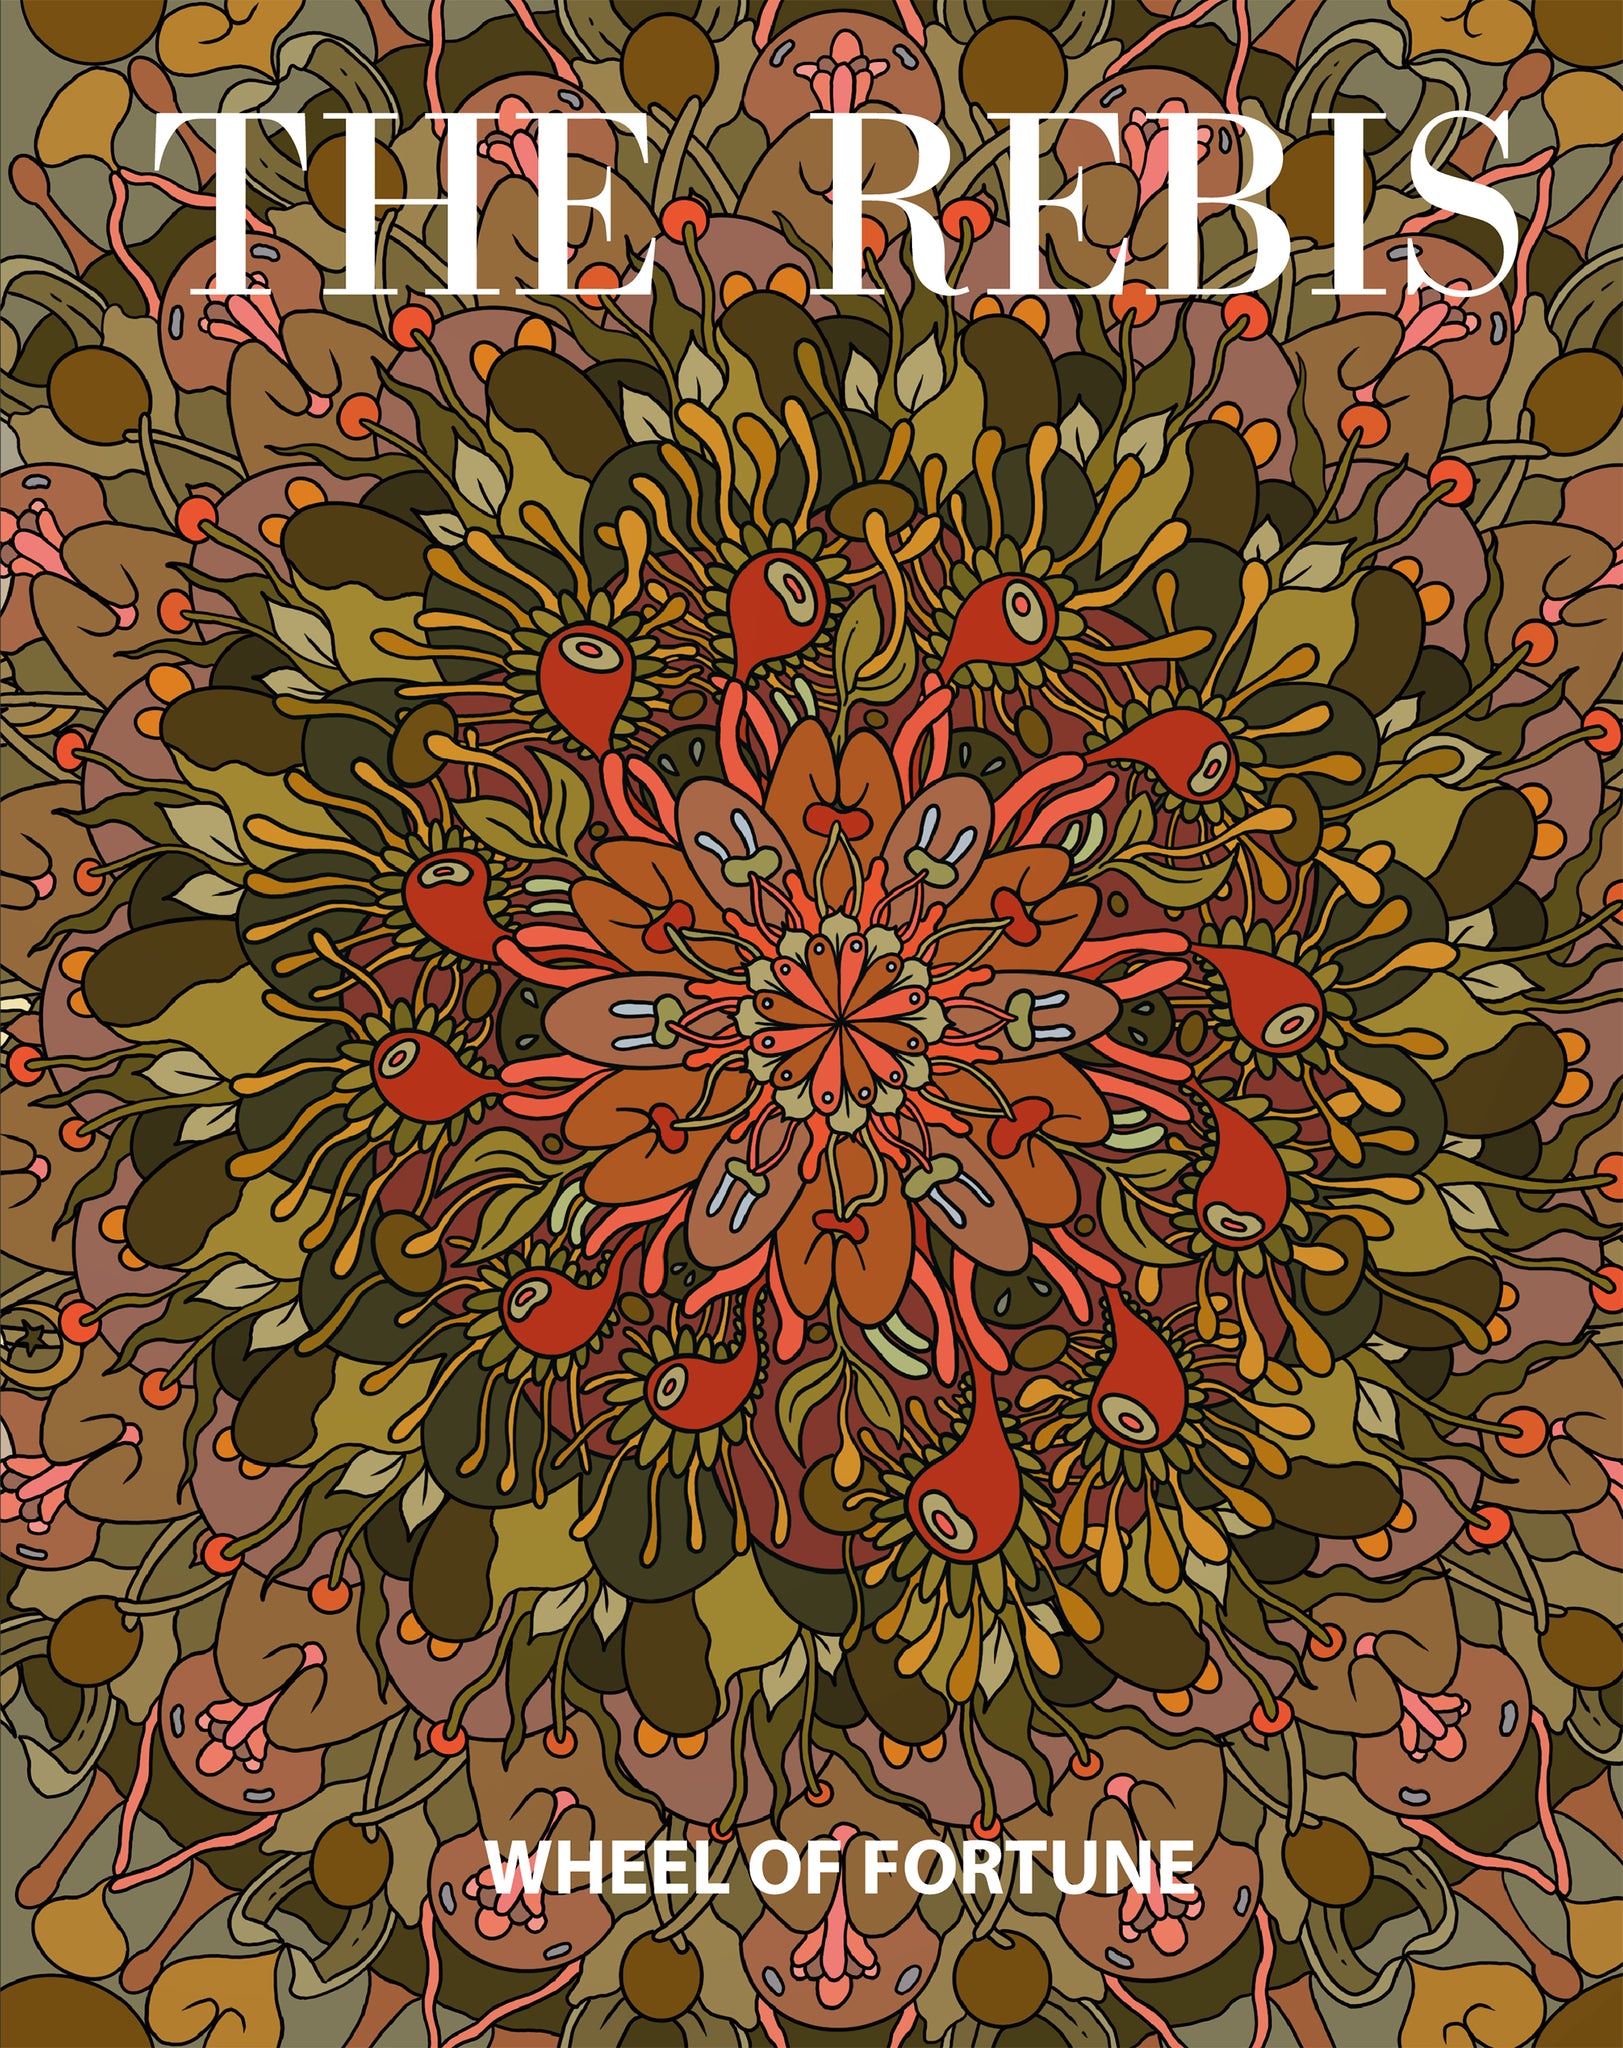 The cover for The Rebis: Wheel of Fortune, an anthology of essays, poetry, artwork, and interviews that explore the themes within the Wheel of Fortune tarot archetype. The cover features an organic mandala of various shapes and textures, in an earth-tone color palette.